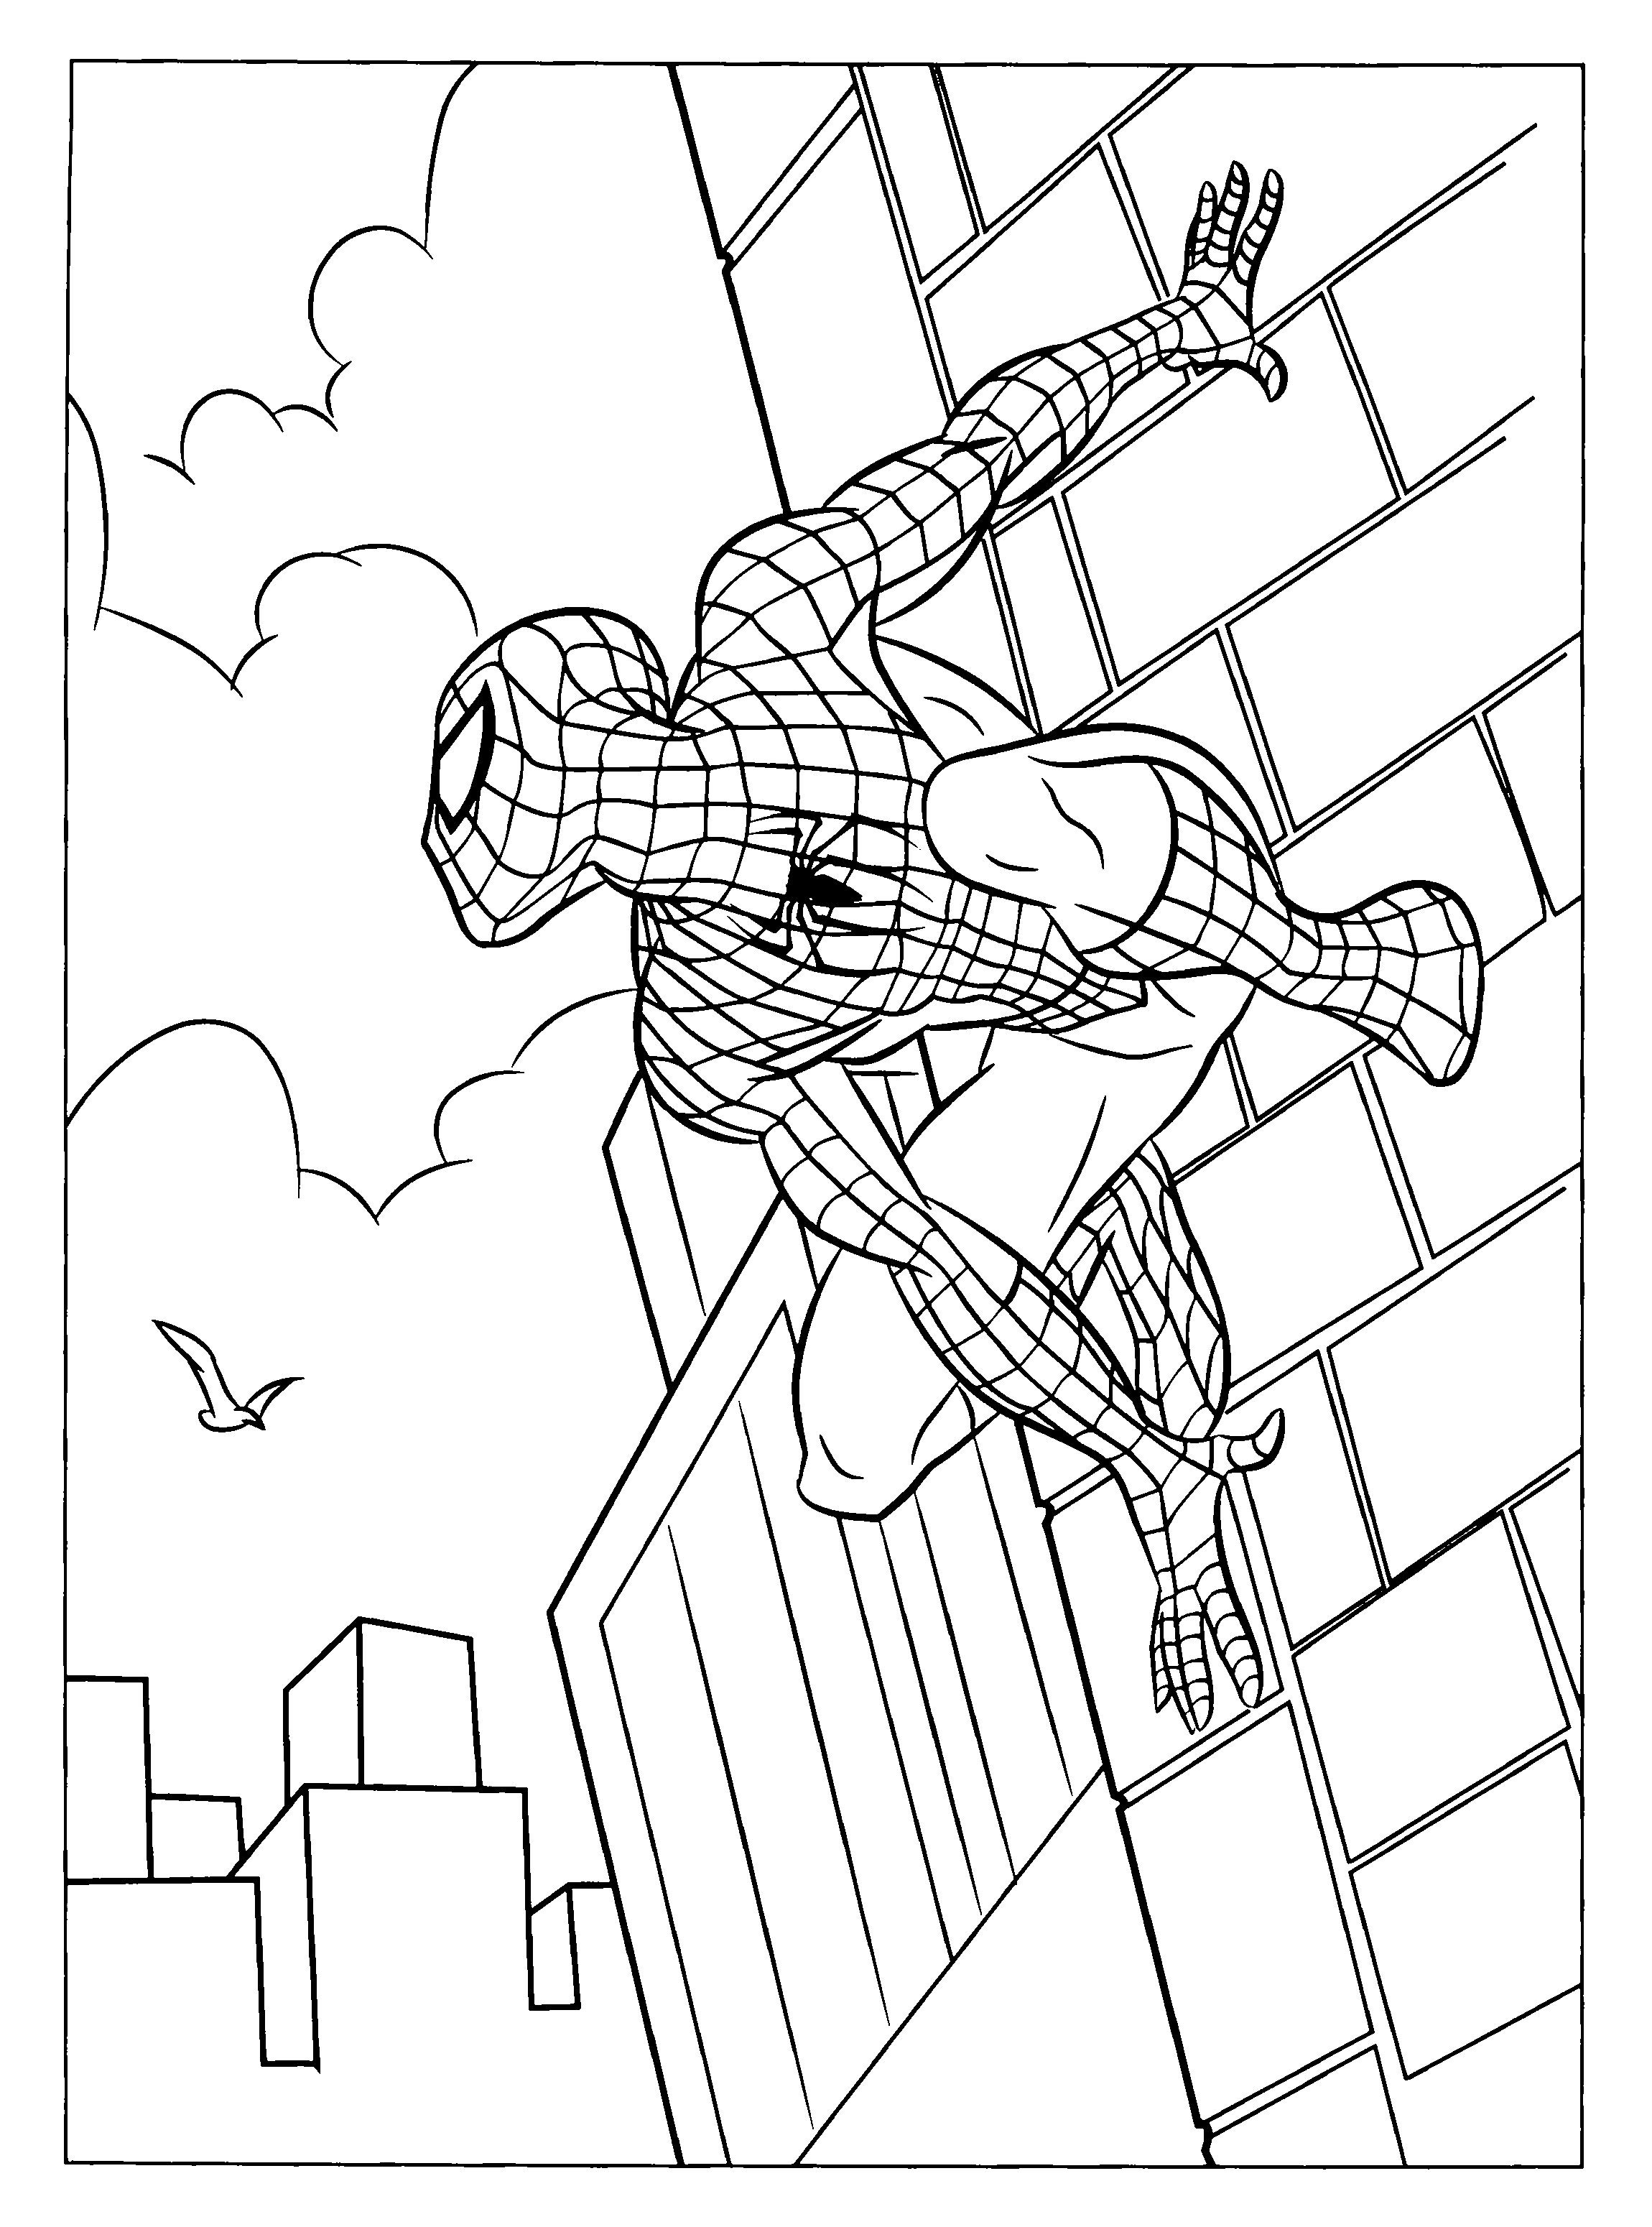 spiderman picture to color spiderman coloring pages download free coloring sheets to color picture spiderman 